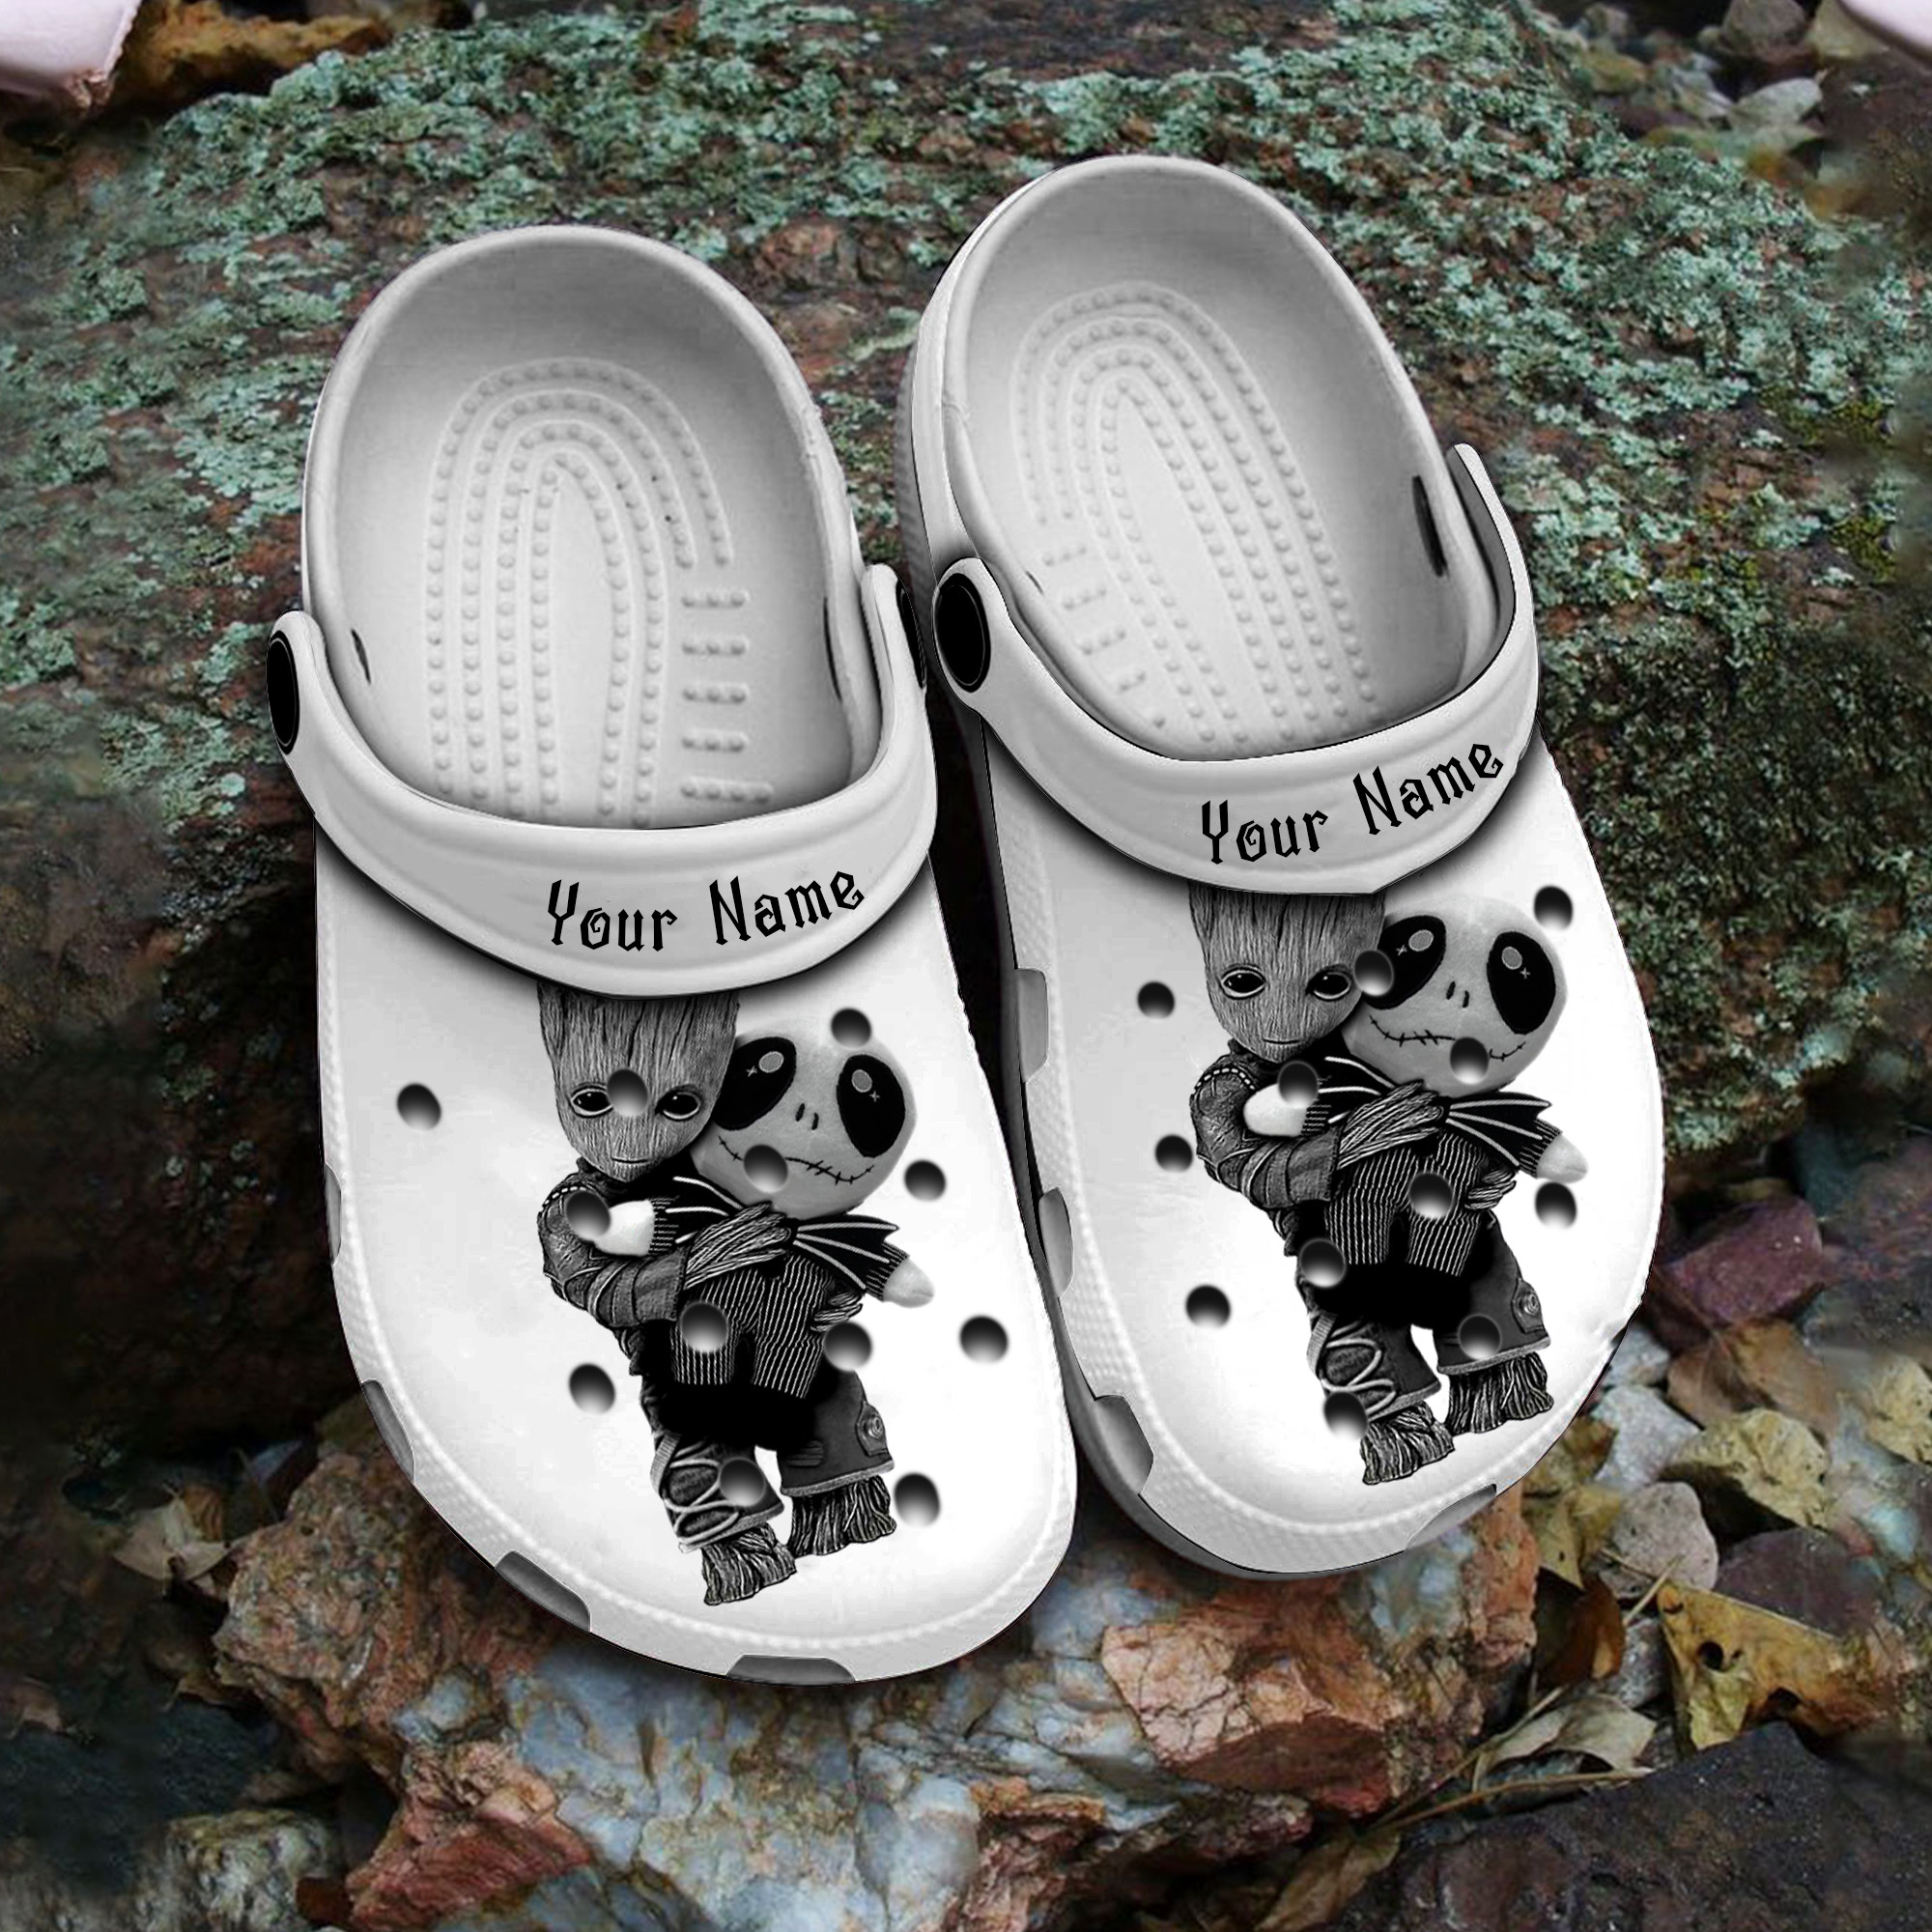 Personalized Baby Groot Jack Skellington Crocs Classic Clog Shoes PANCR1208